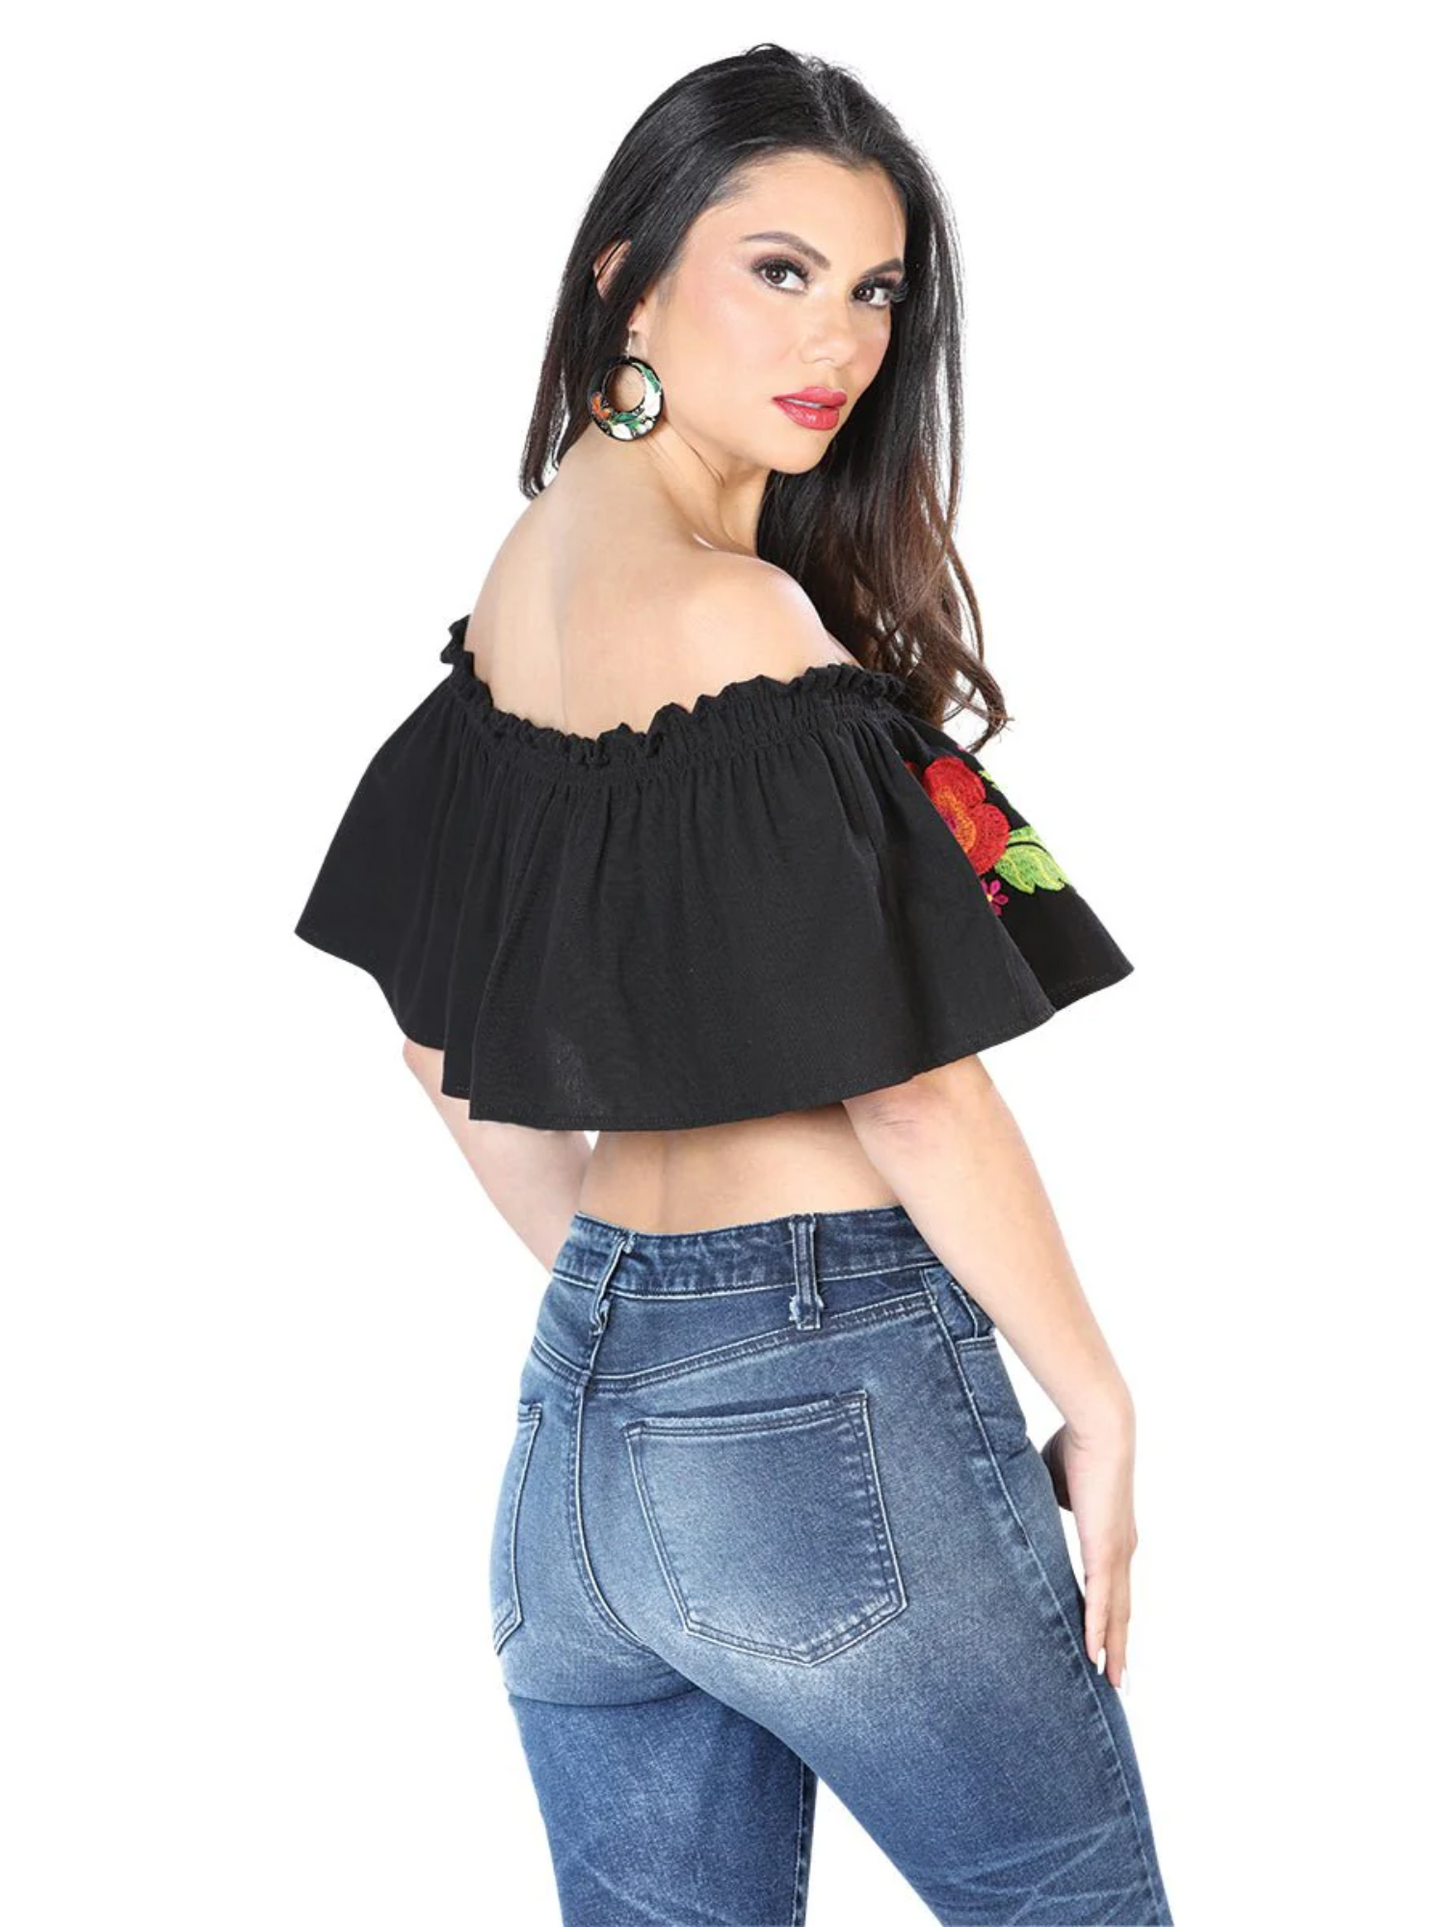 Olan Artisanal Short Blouse Embroidered with Flowers for Women Handmade Crop Top Mexico Artesanal